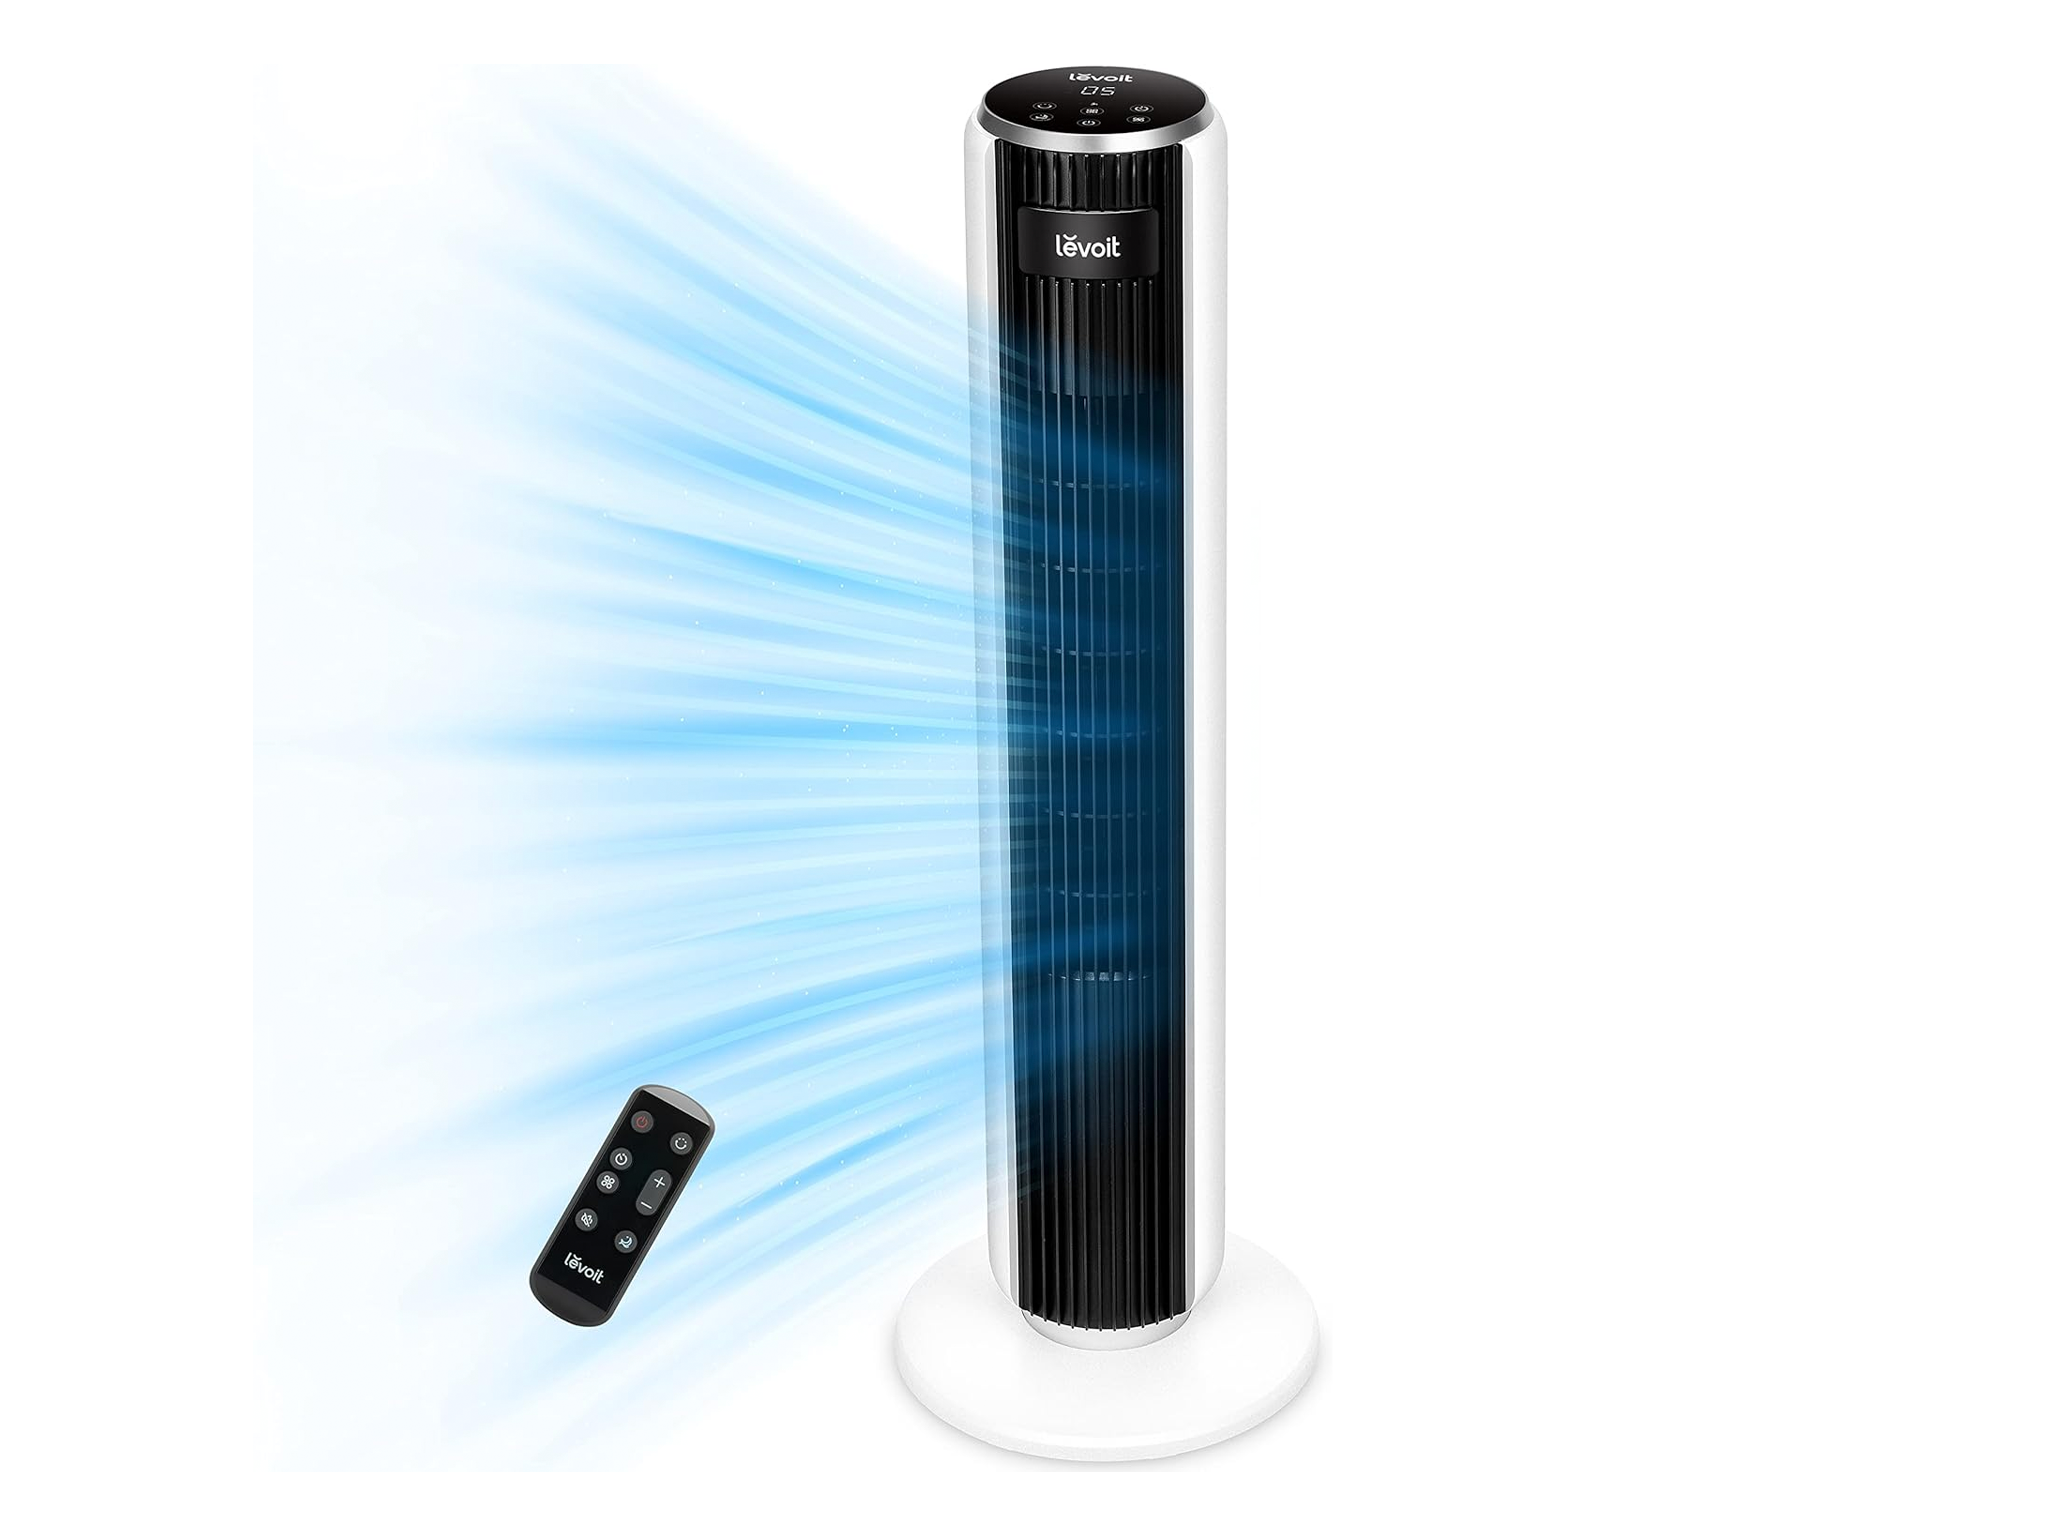 indybest, fans, summer, amazon deals, amazon, this tower fan blew us away with its performance – and it has 30% off